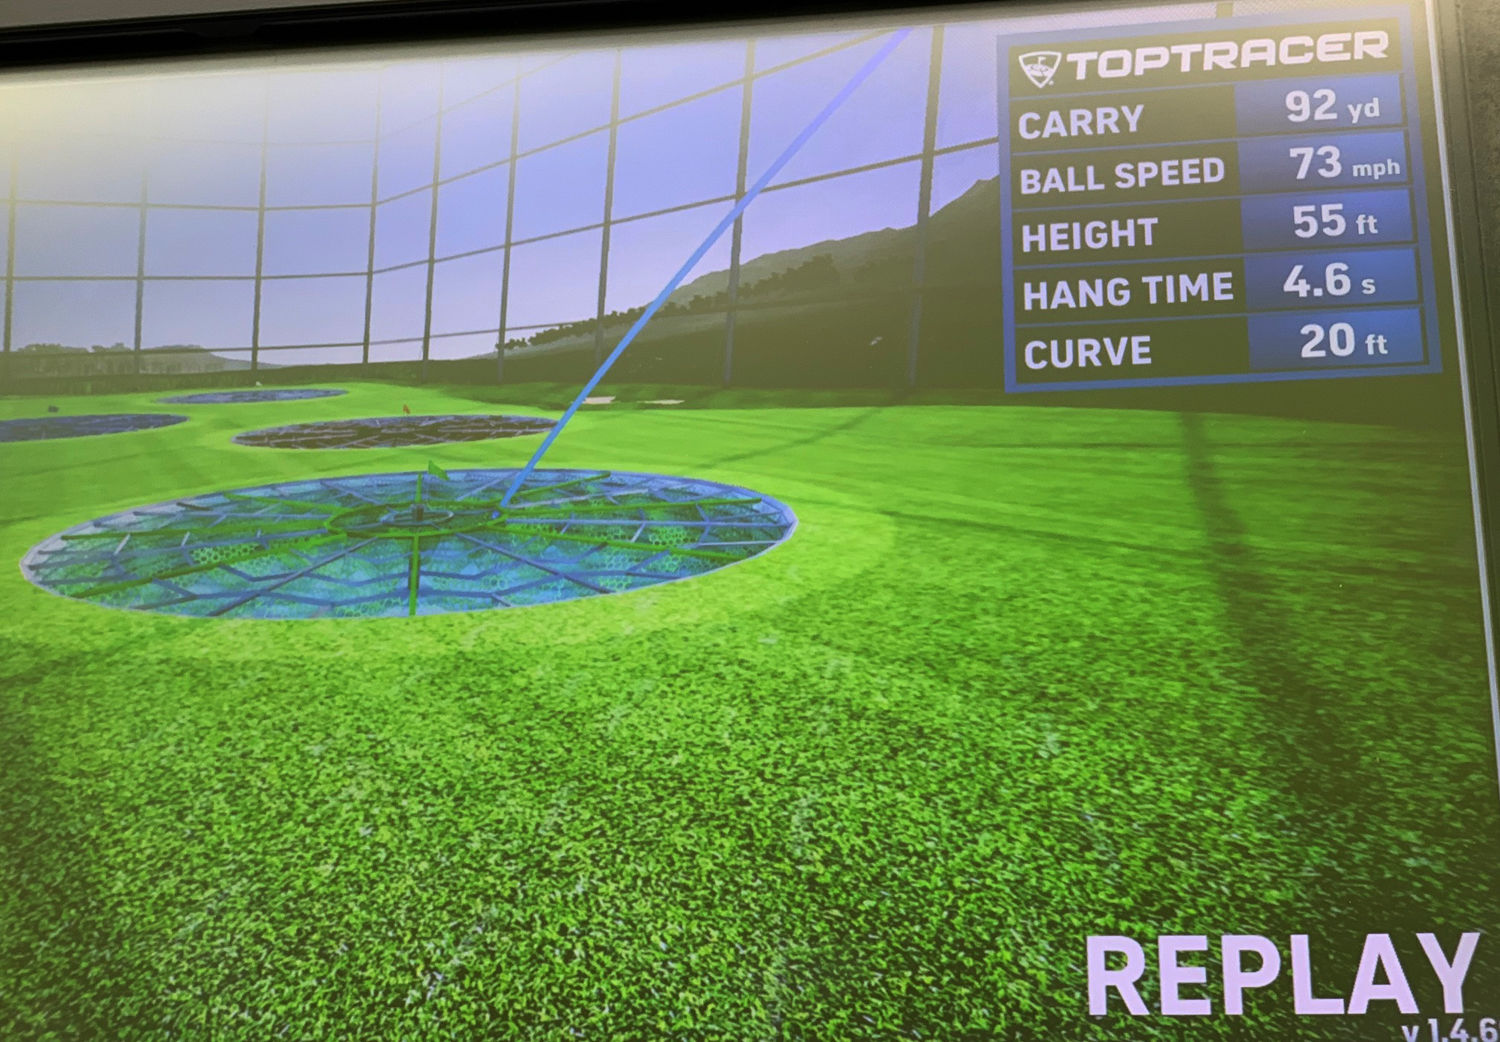 Topgolf National Harbor will feature Toptracer technology, which tracks shots the same way as during televised broadcasts of the PGA Tour. (WTOP/Noah Frank)